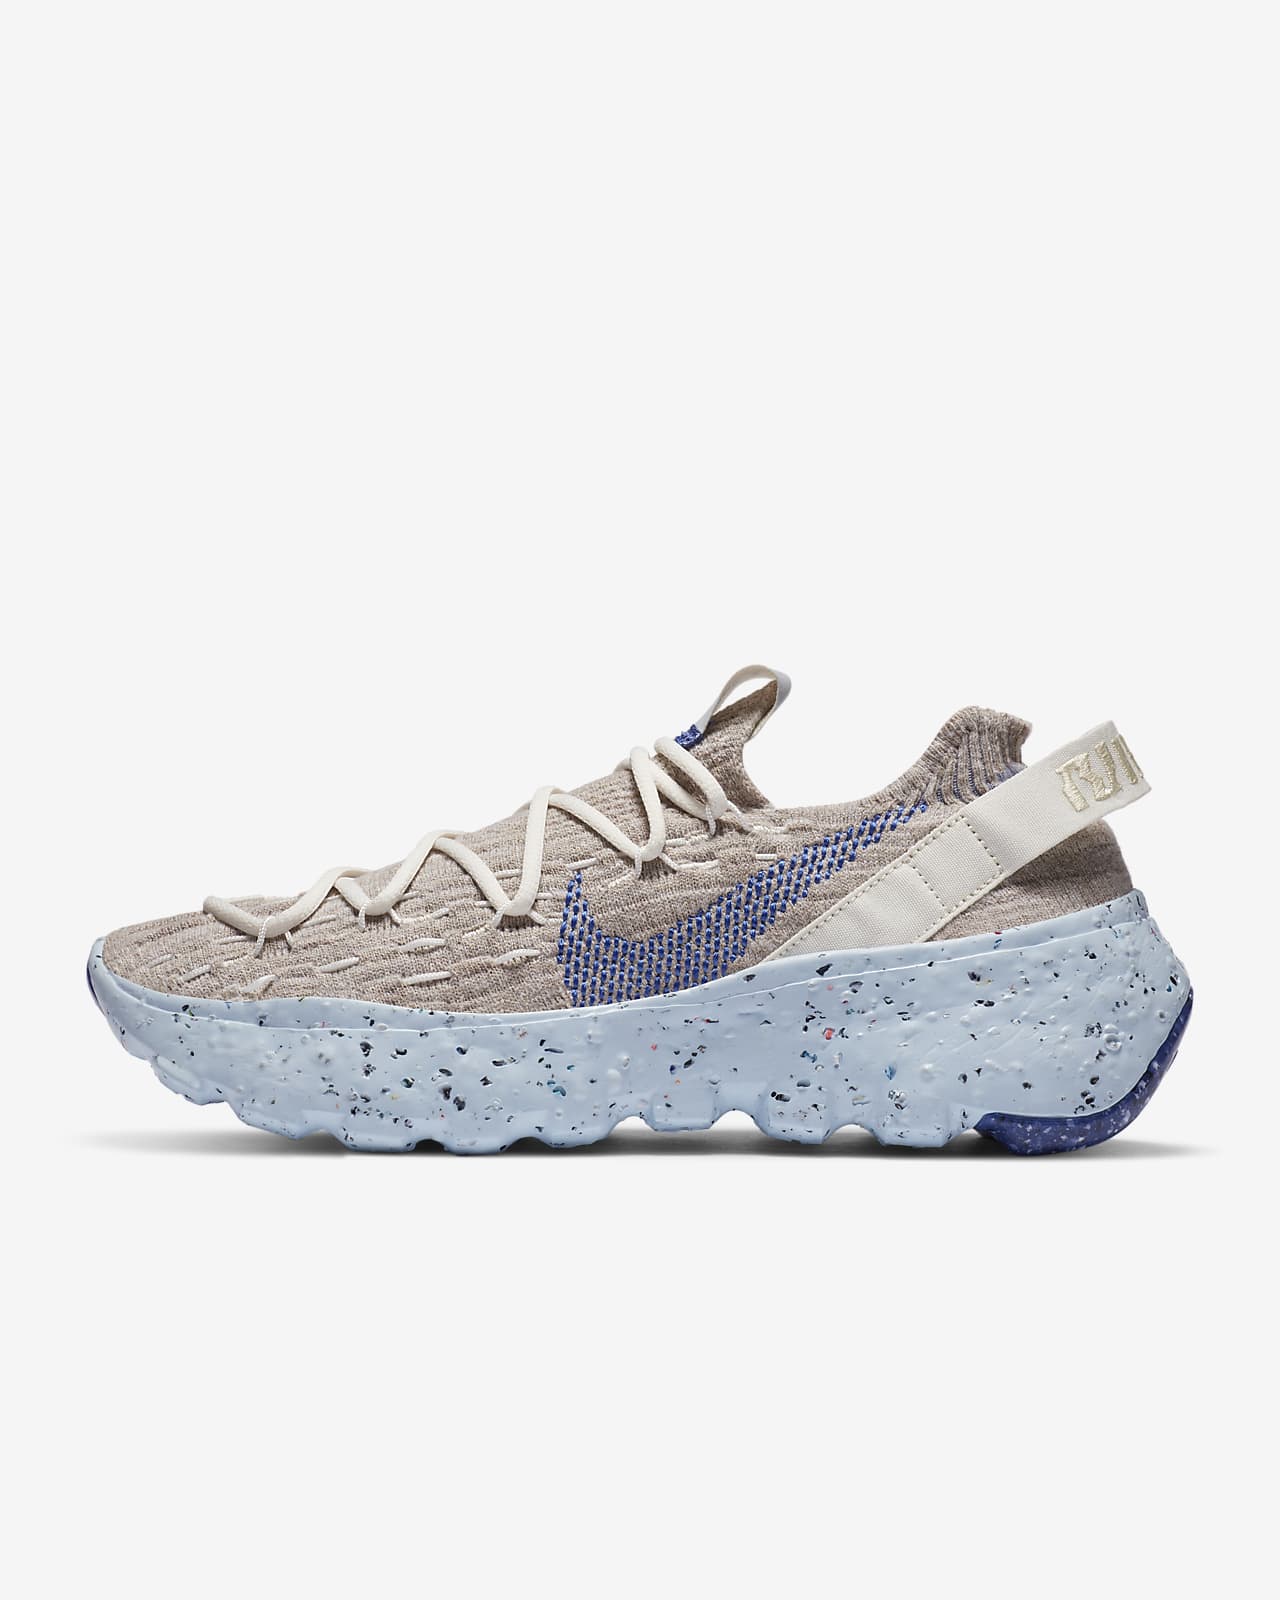 nike space hippie shoes